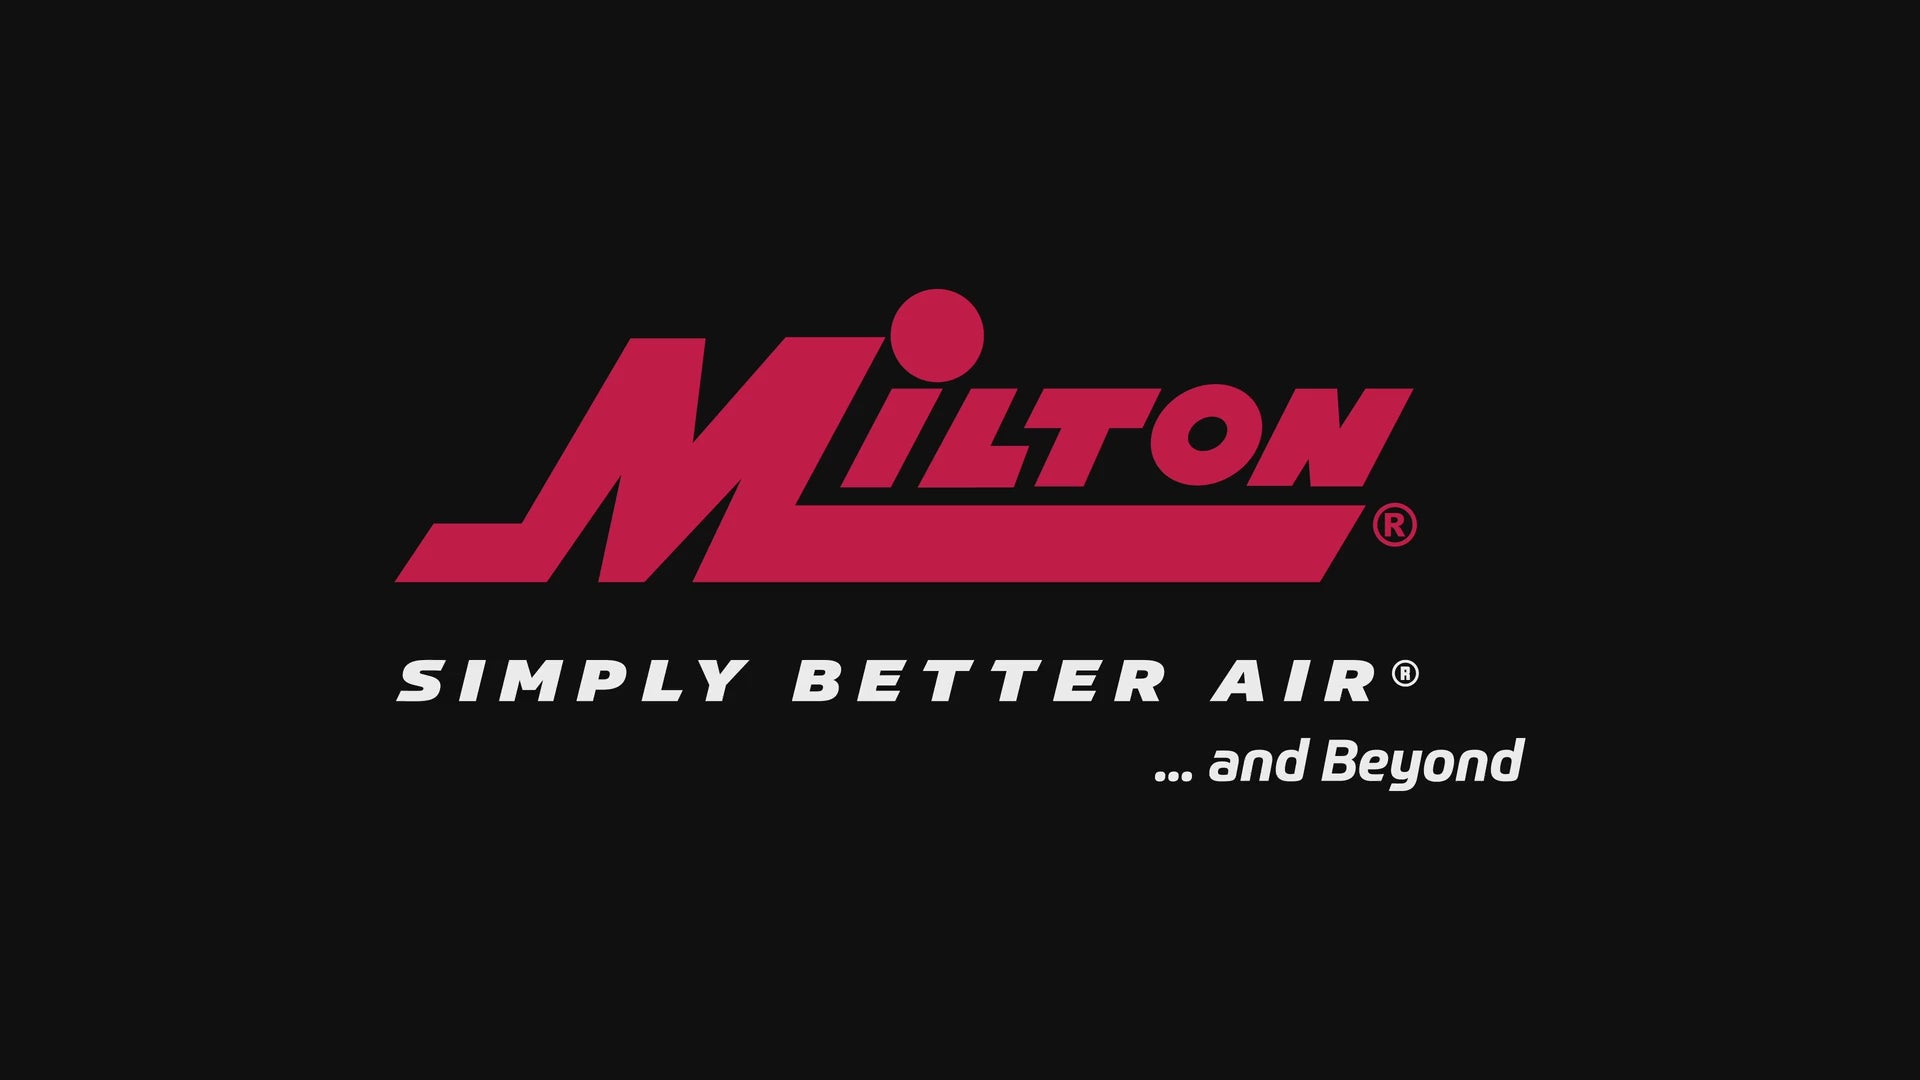 NEW & IMPROVED - Milton® Tire Inflator Gauge with Dual Head Straight Foot Air Chuck 15” Air Hose 10-160 PSI